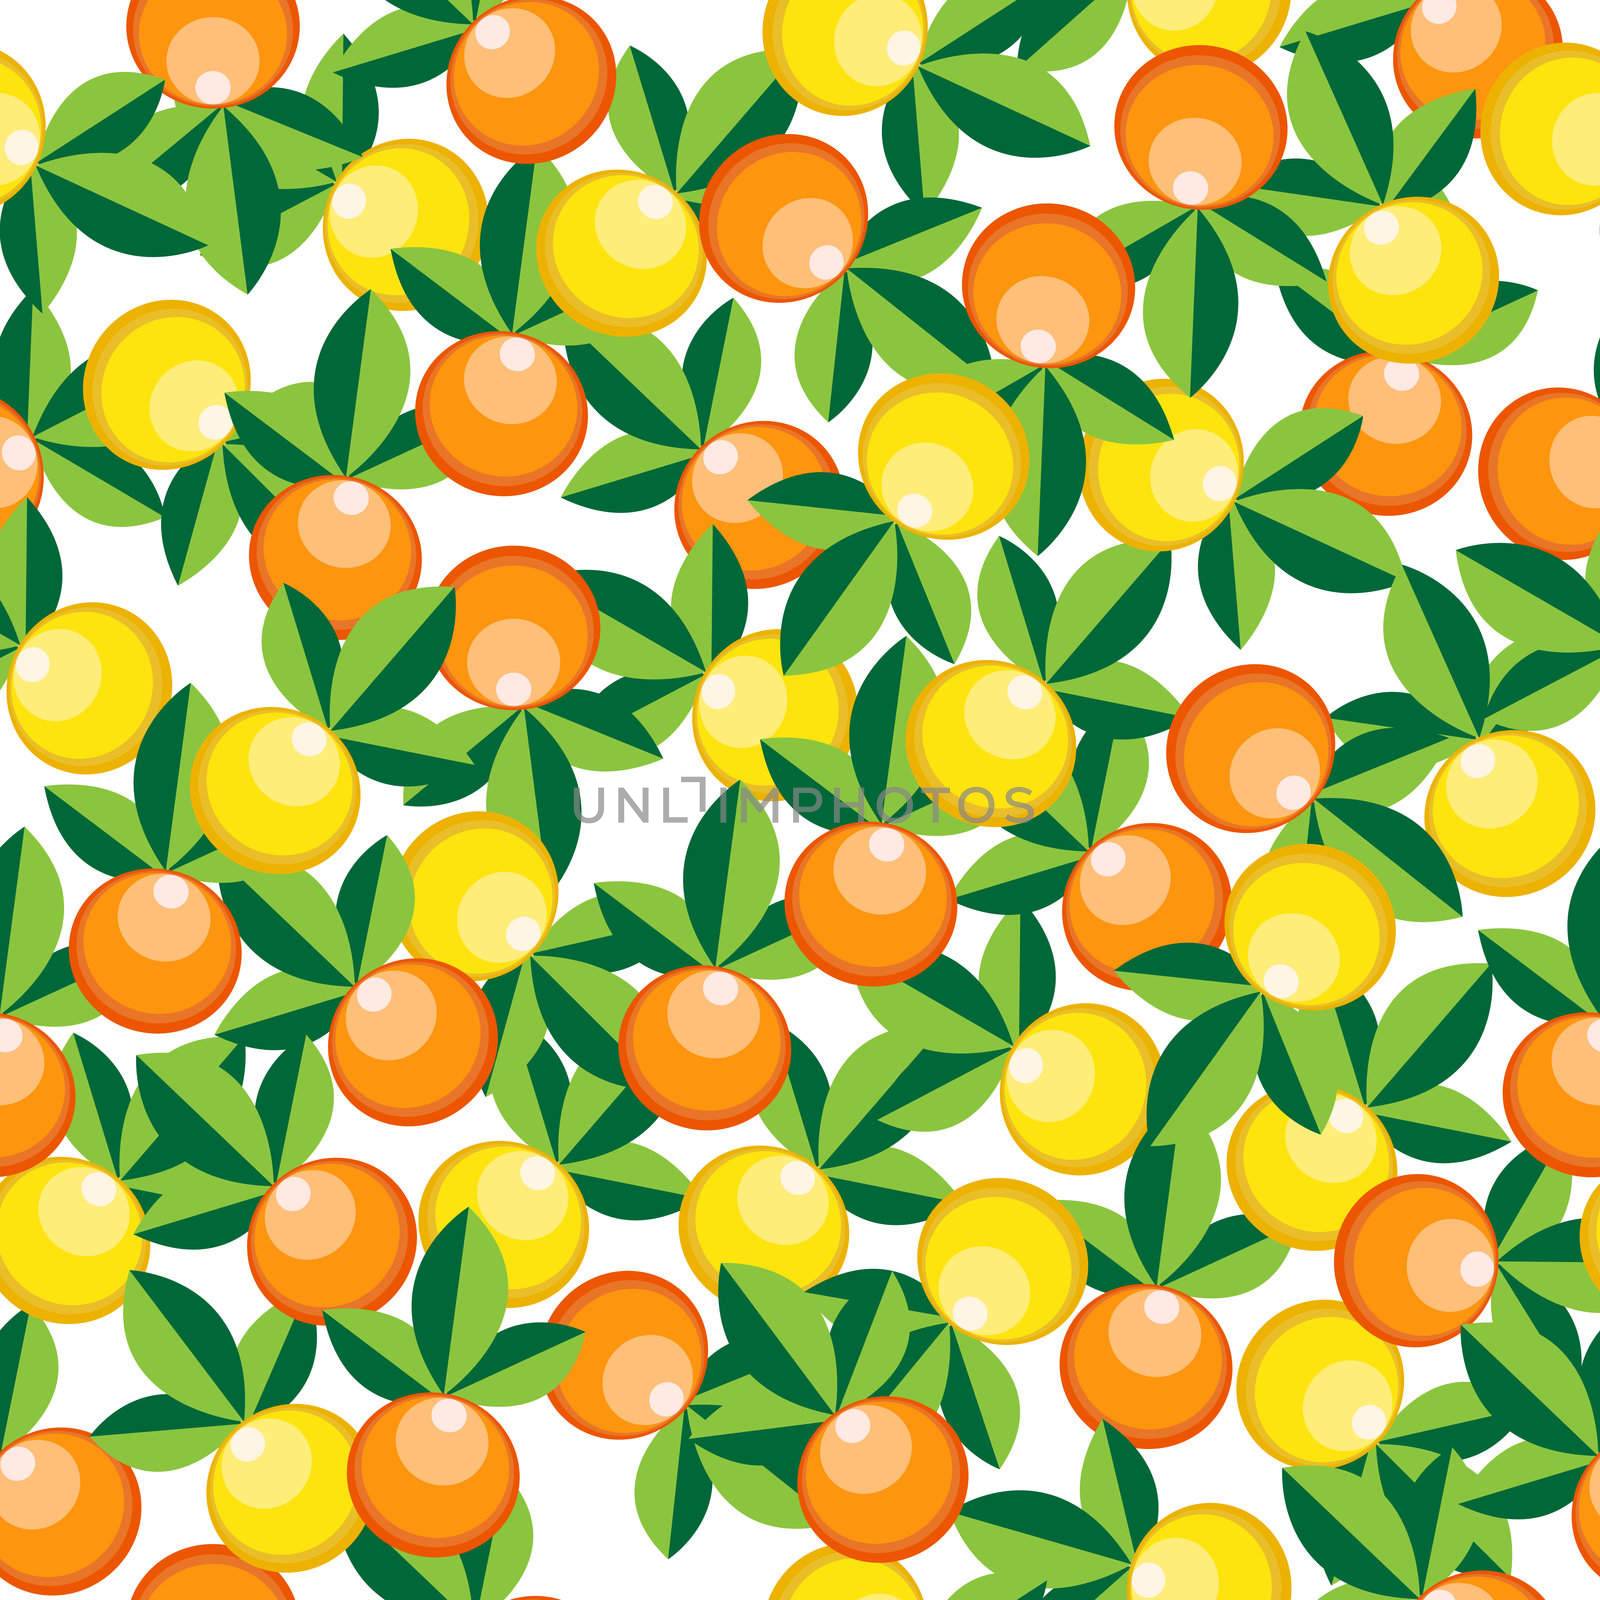 oranges and lemons pattern by robertosch